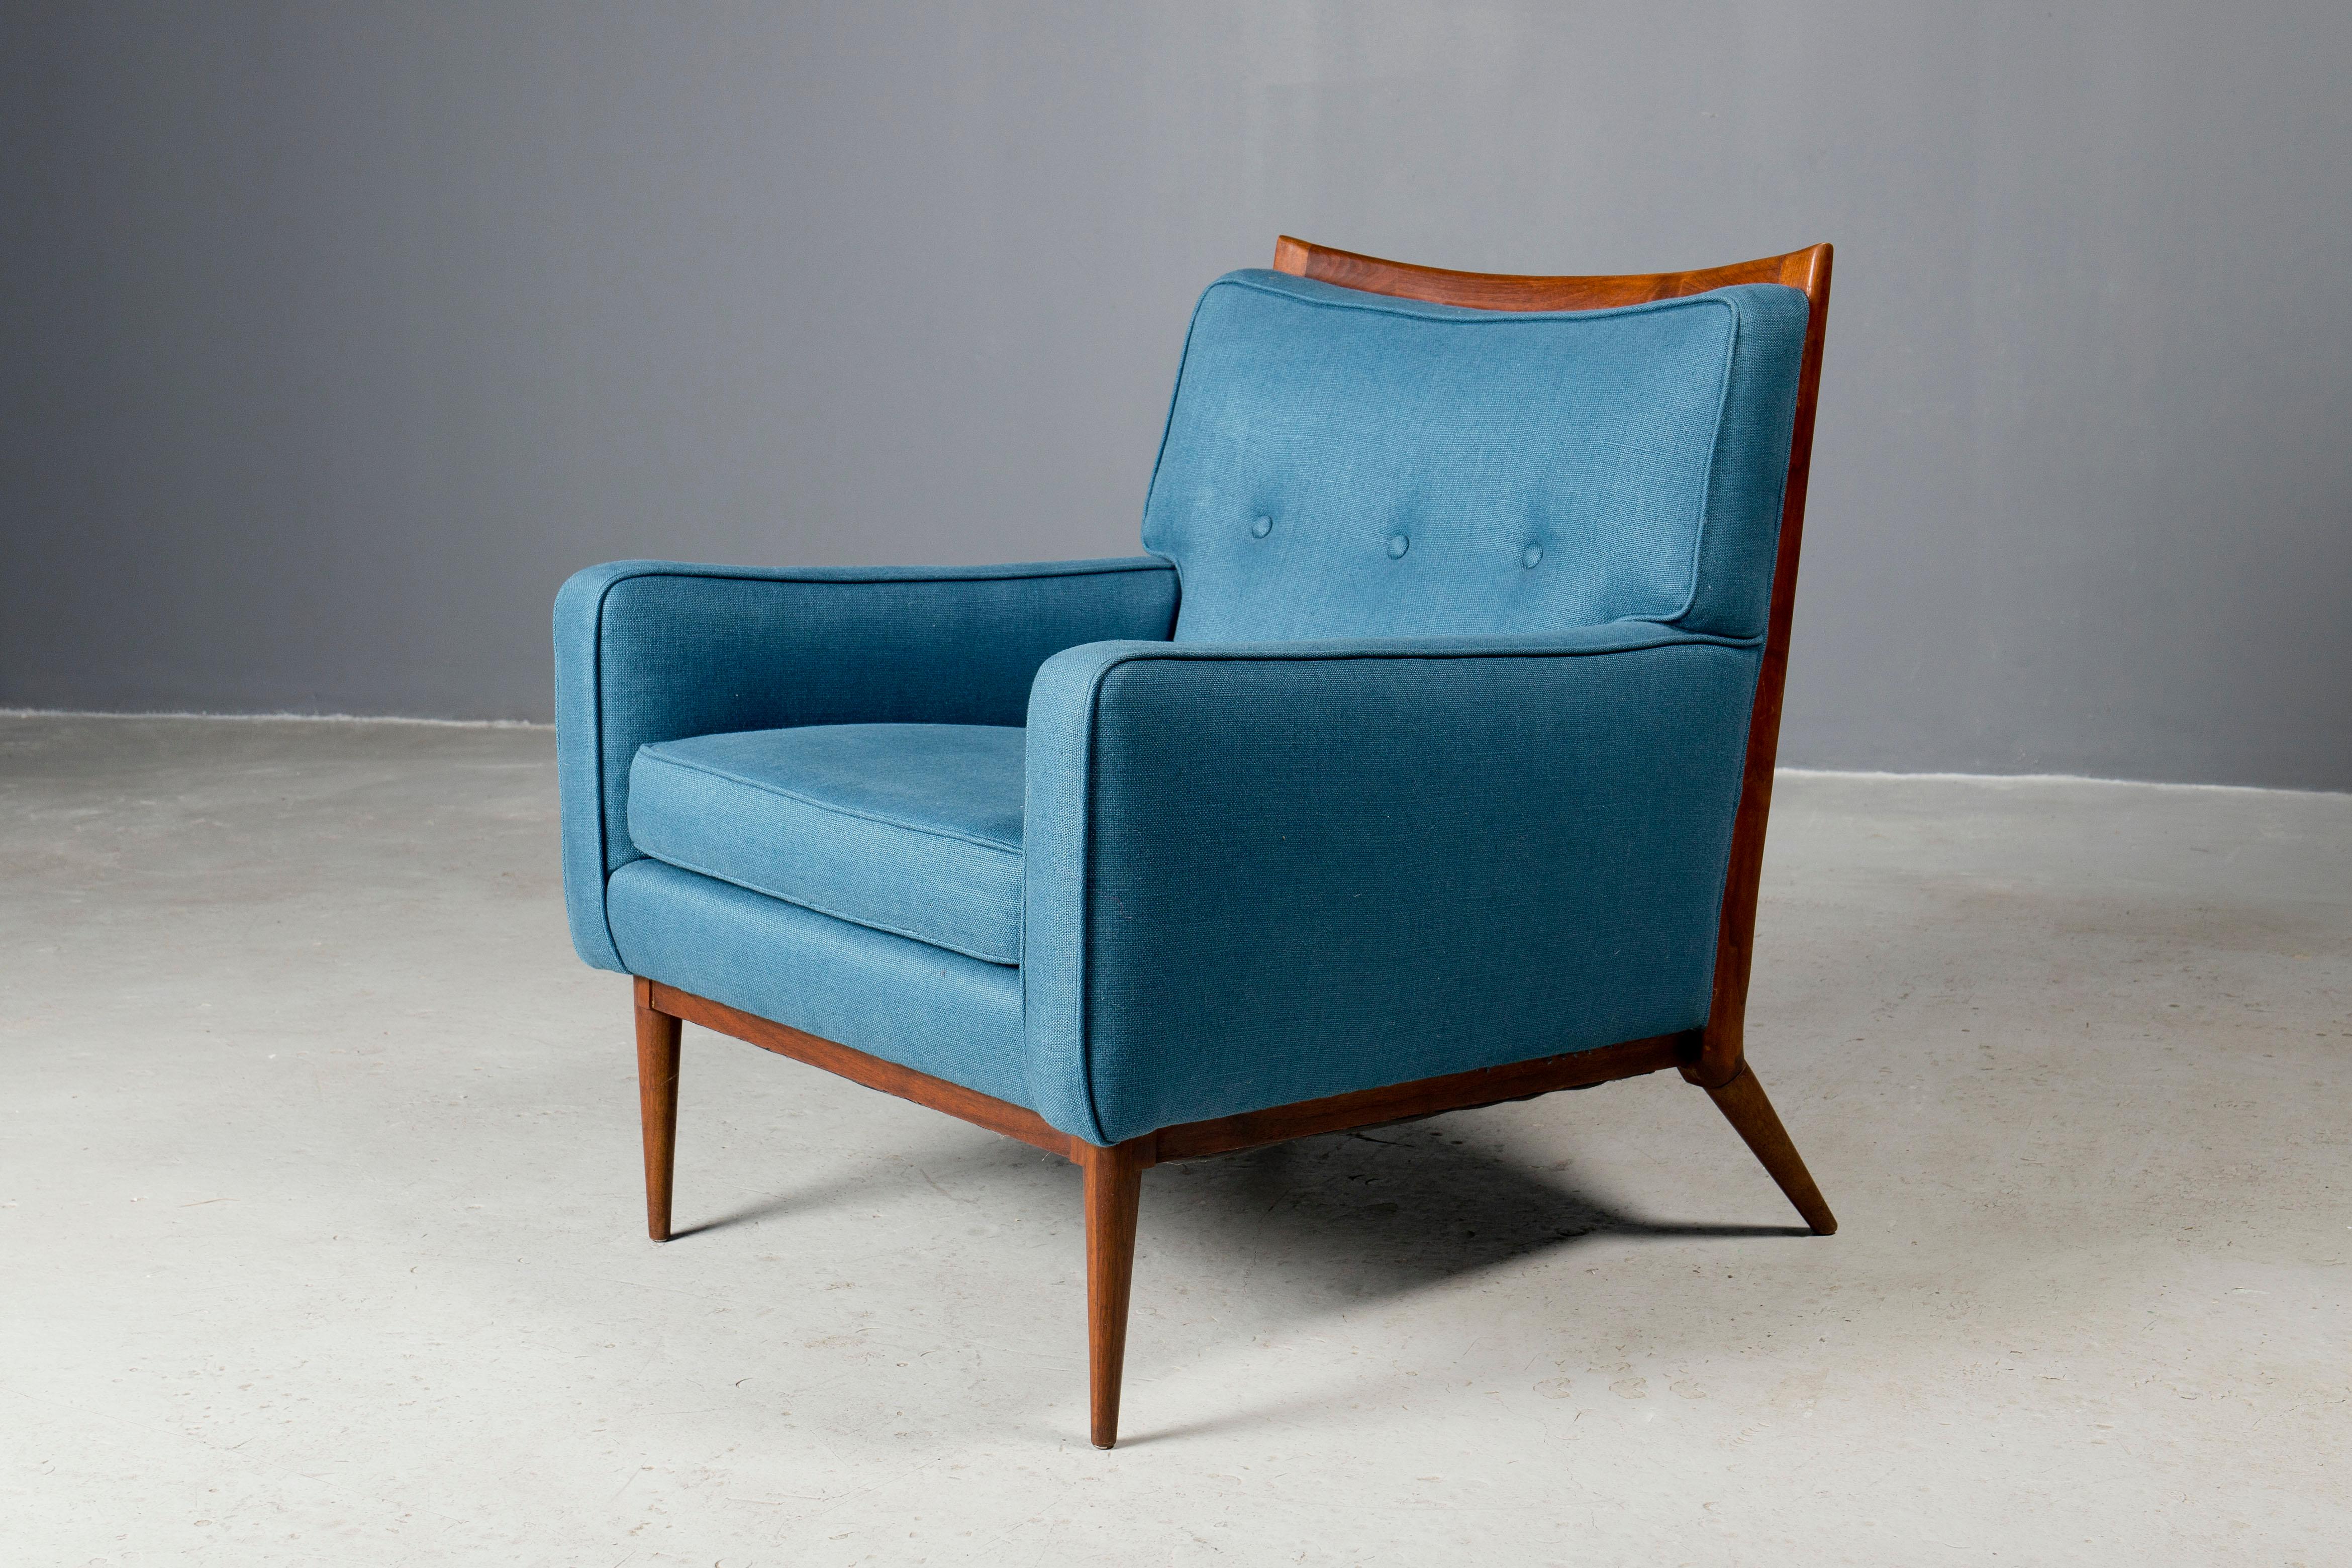 Iconic lounge chair, designed by Paul McCobb and produced by Calvin, NY, 1950s.
Frame is original in a natural finish and complimented by a beautiful blue upholstery. 
By far McCobb's most elegant design!
Available for viewing in person in my